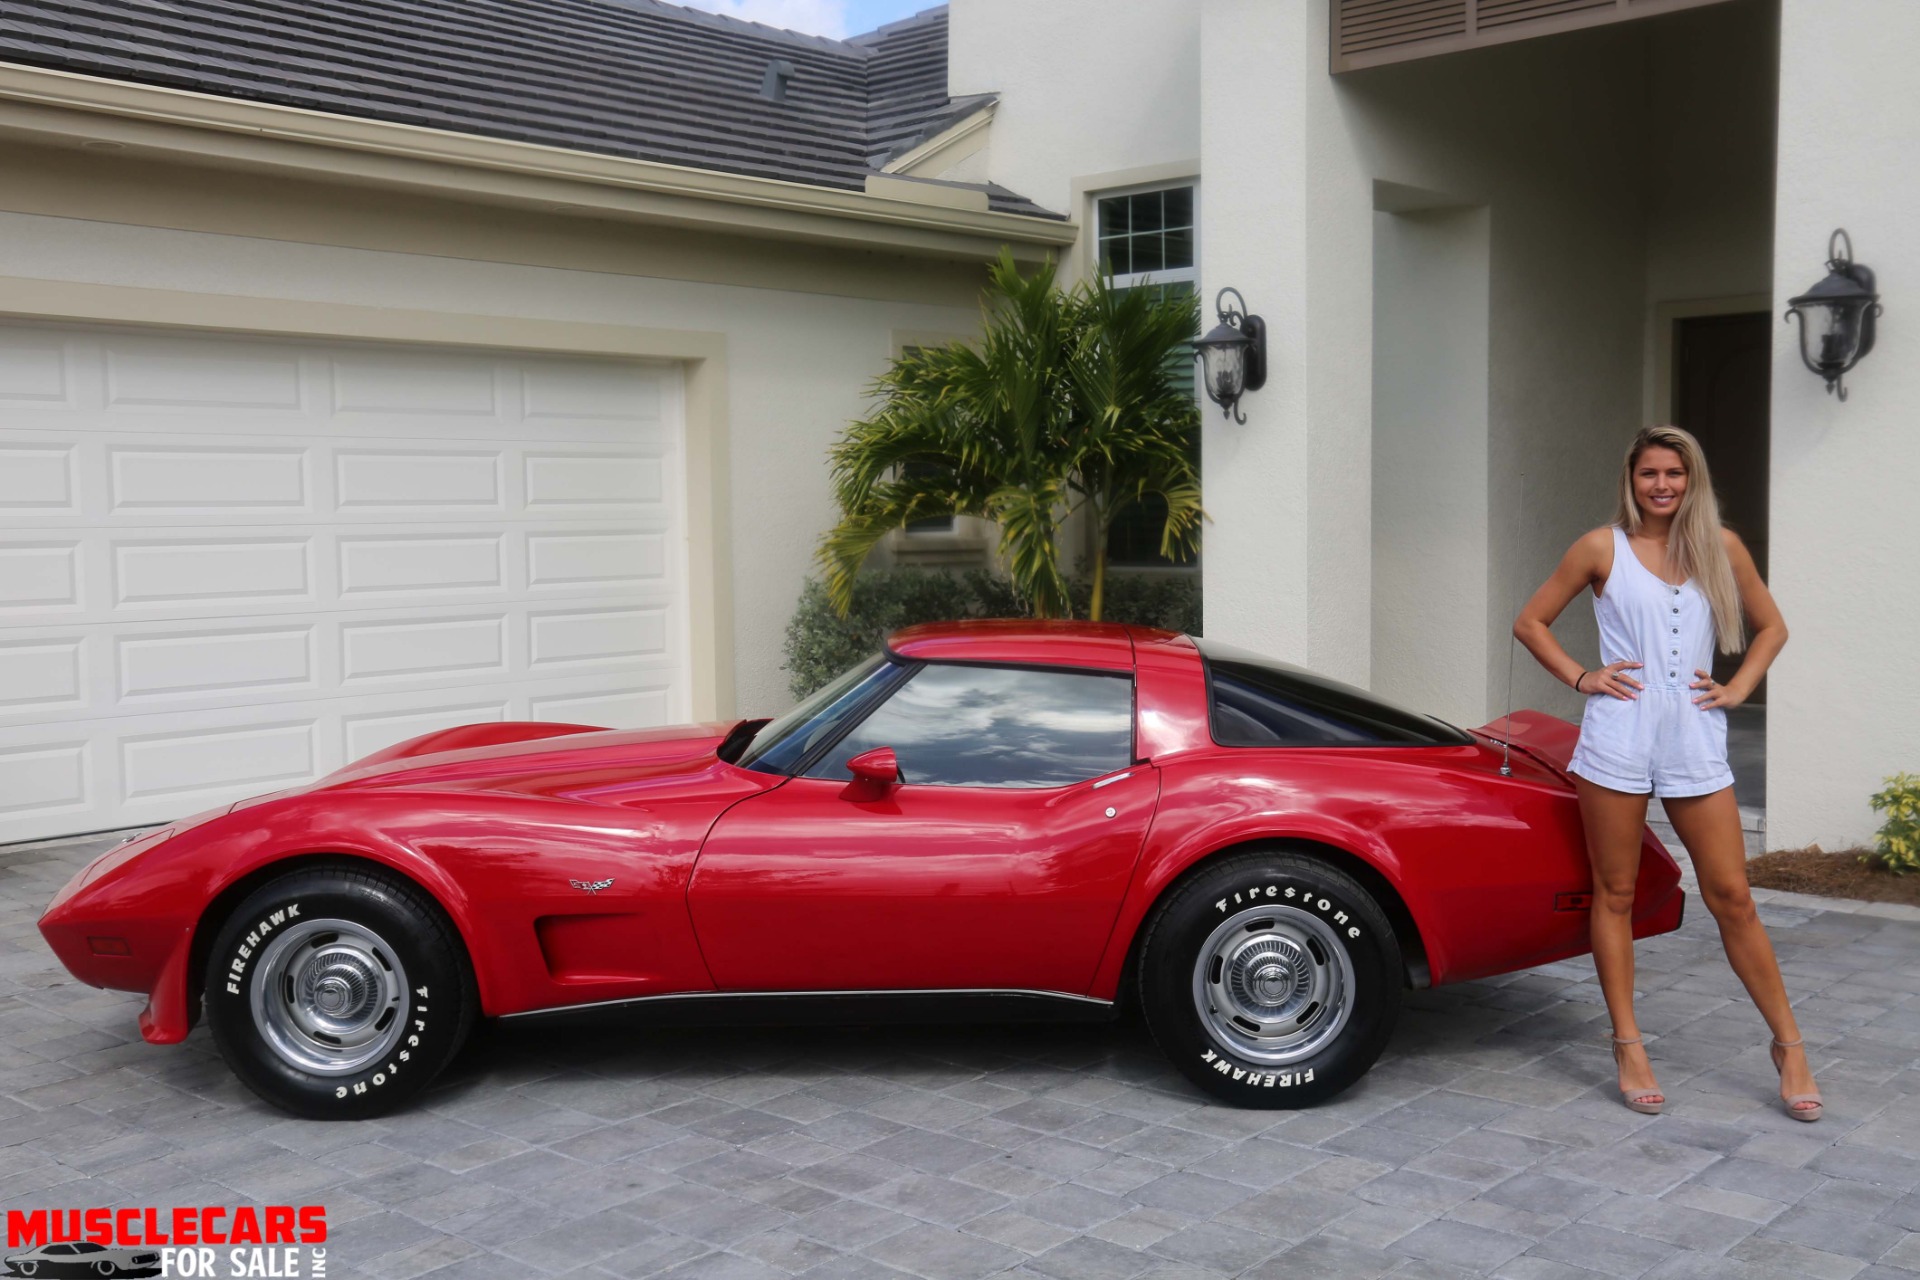 Used 1979 Chevrolet Corvette Stingray For Sale ($17,000) | Muscle Cars